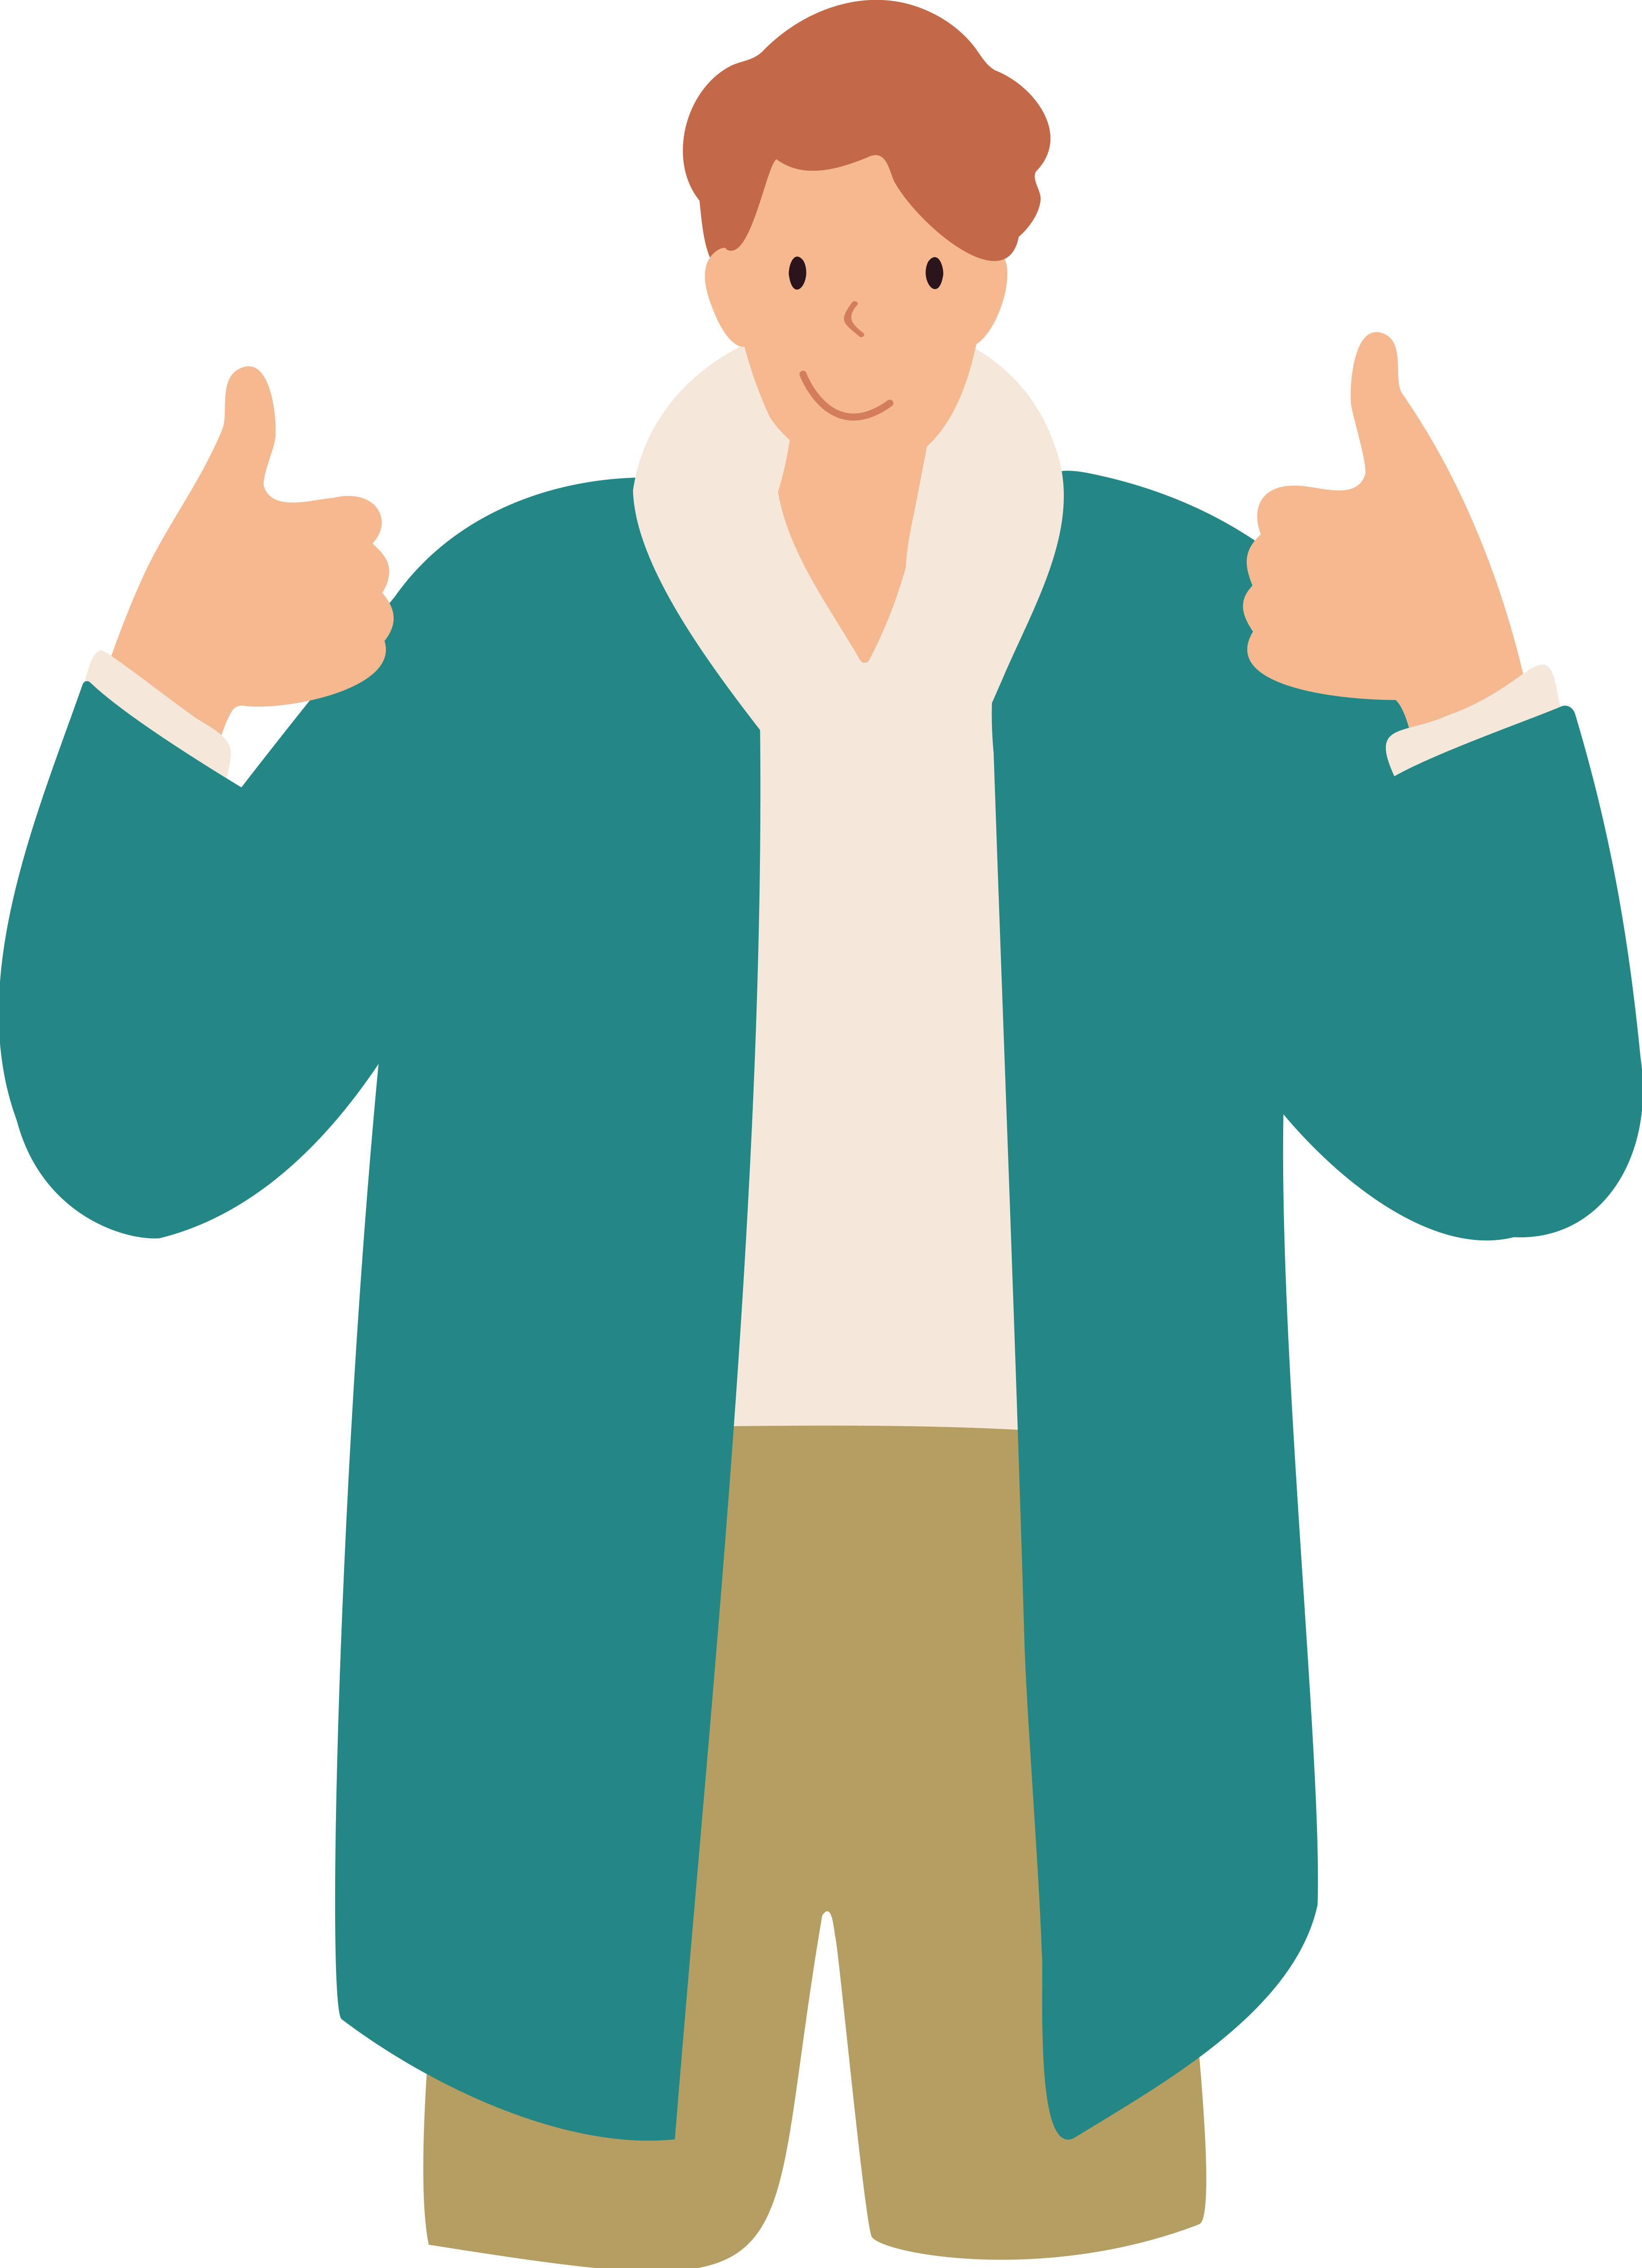 Illustration of a man smiling and giving two thumbs ups